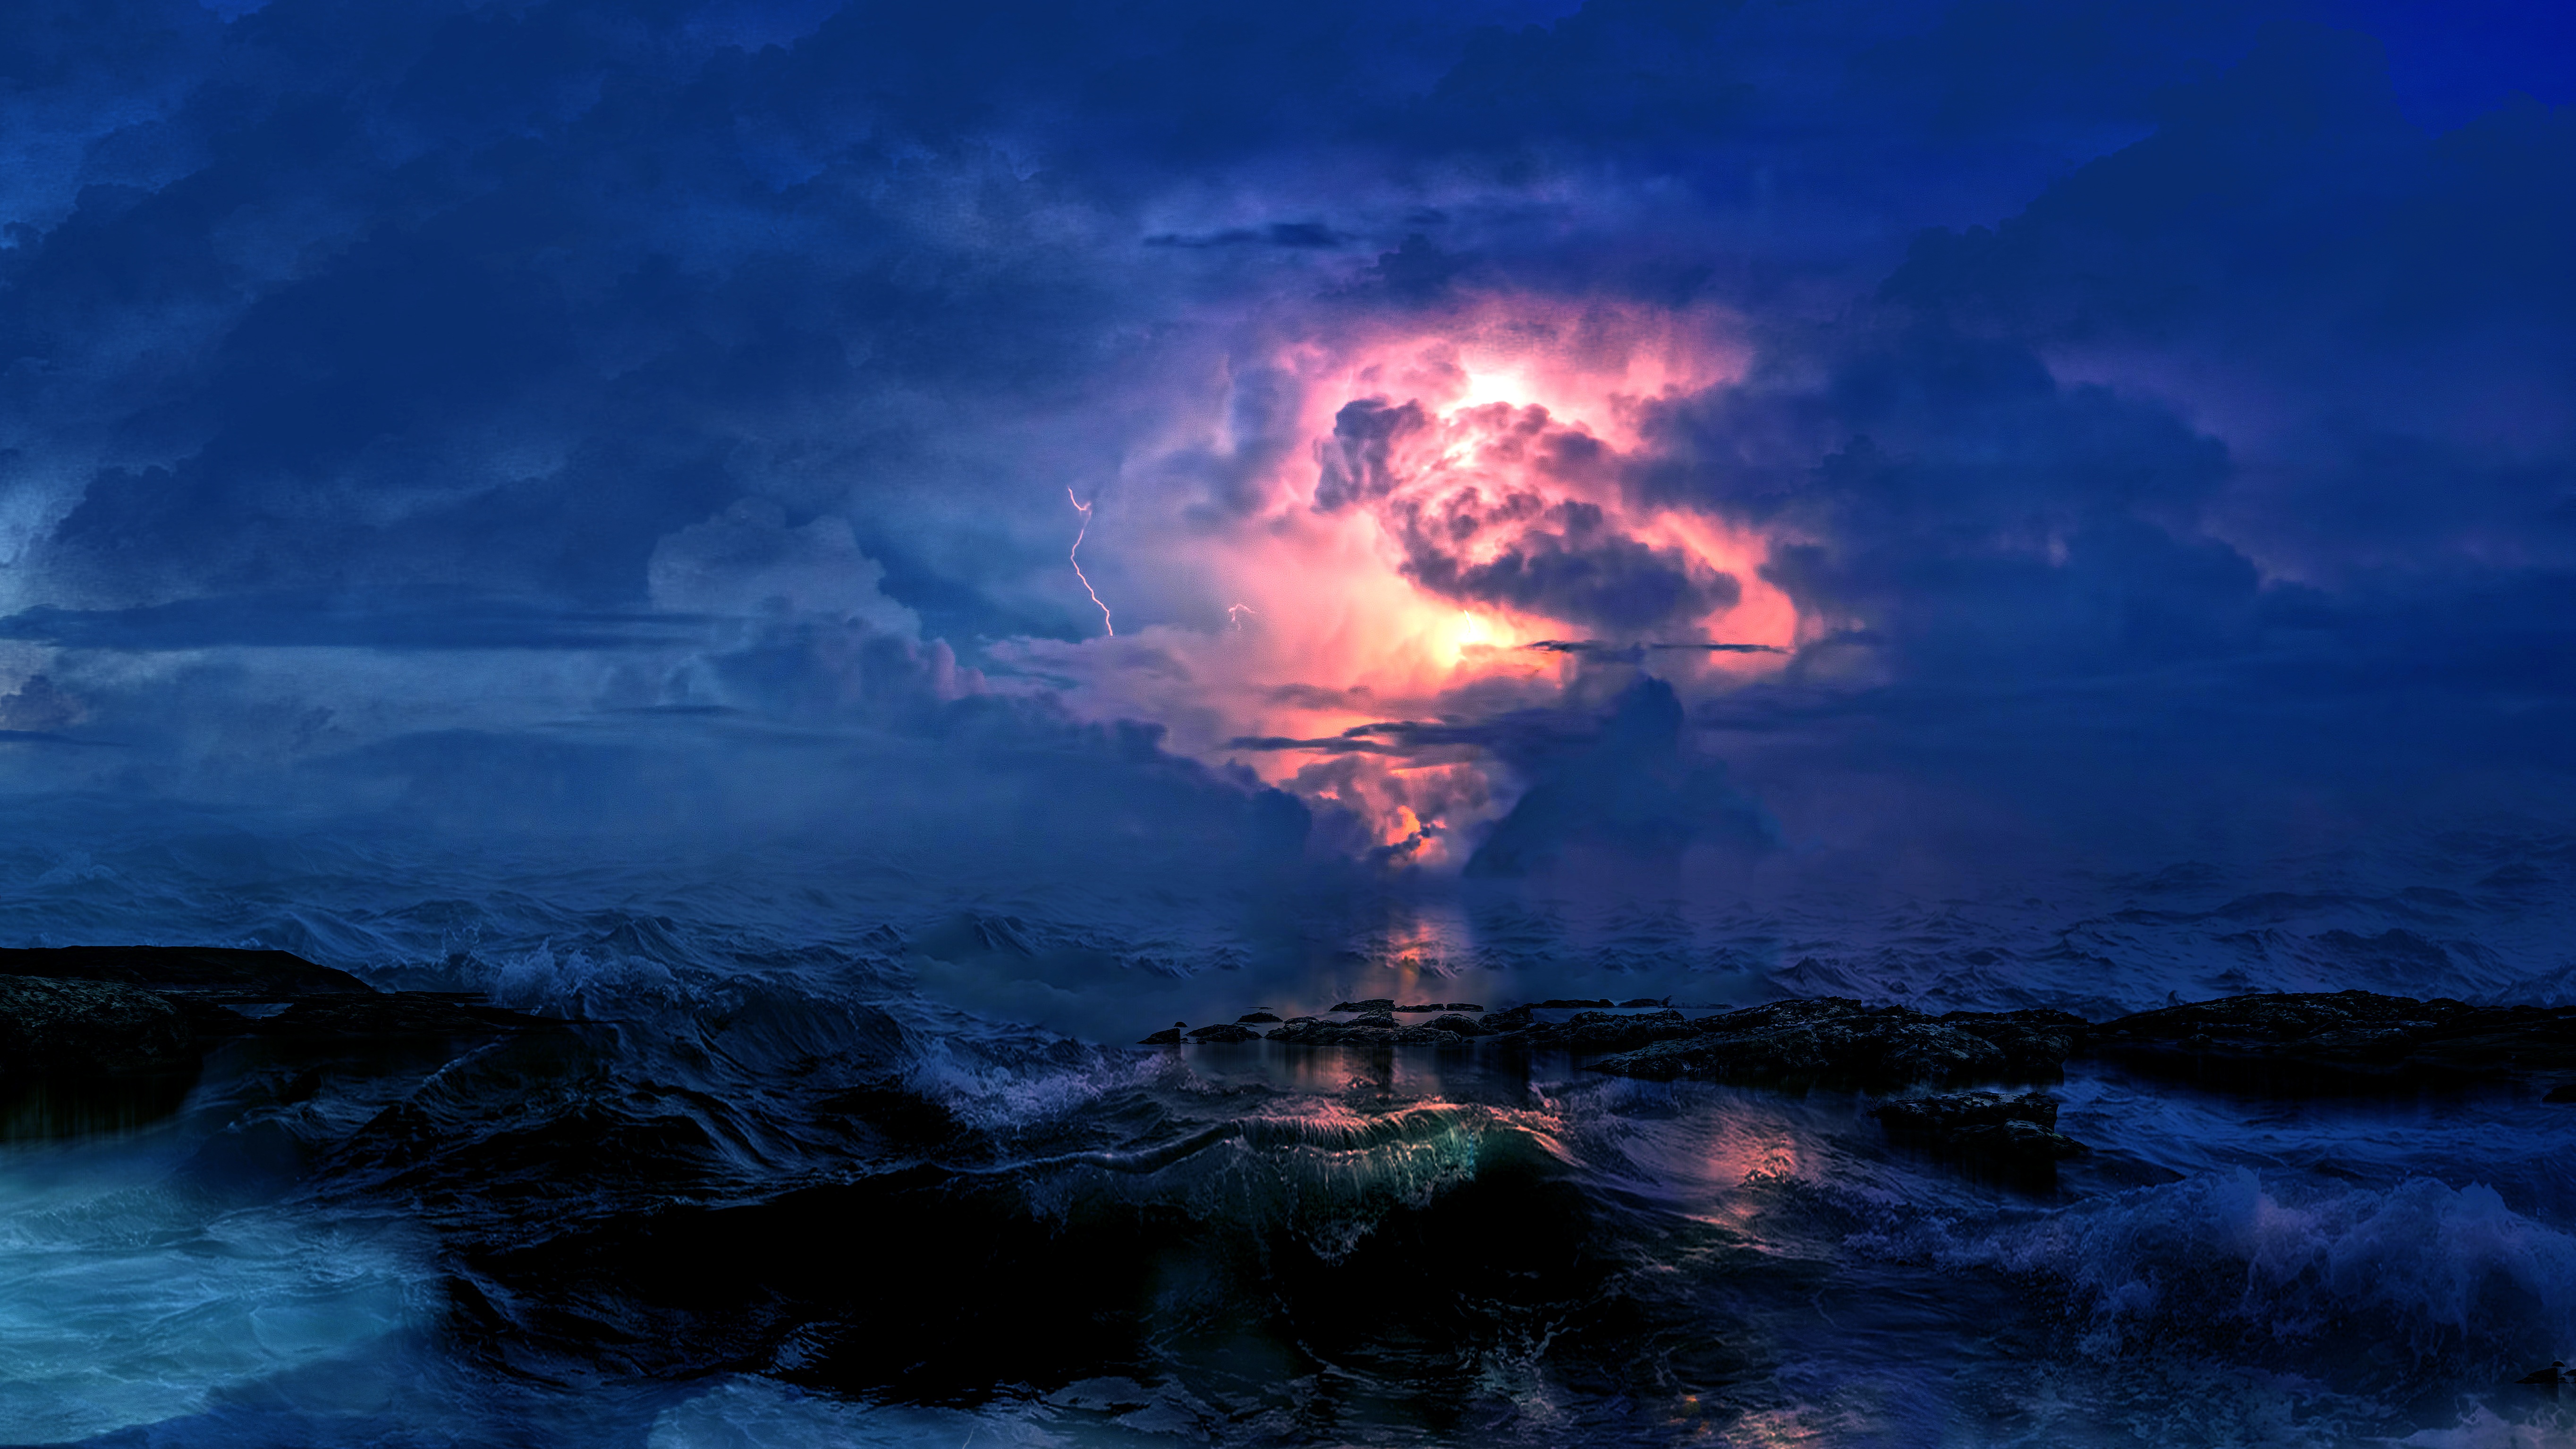 lightning, nature, sea, clouds, waves, mainly cloudy, overcast, storm cellphone